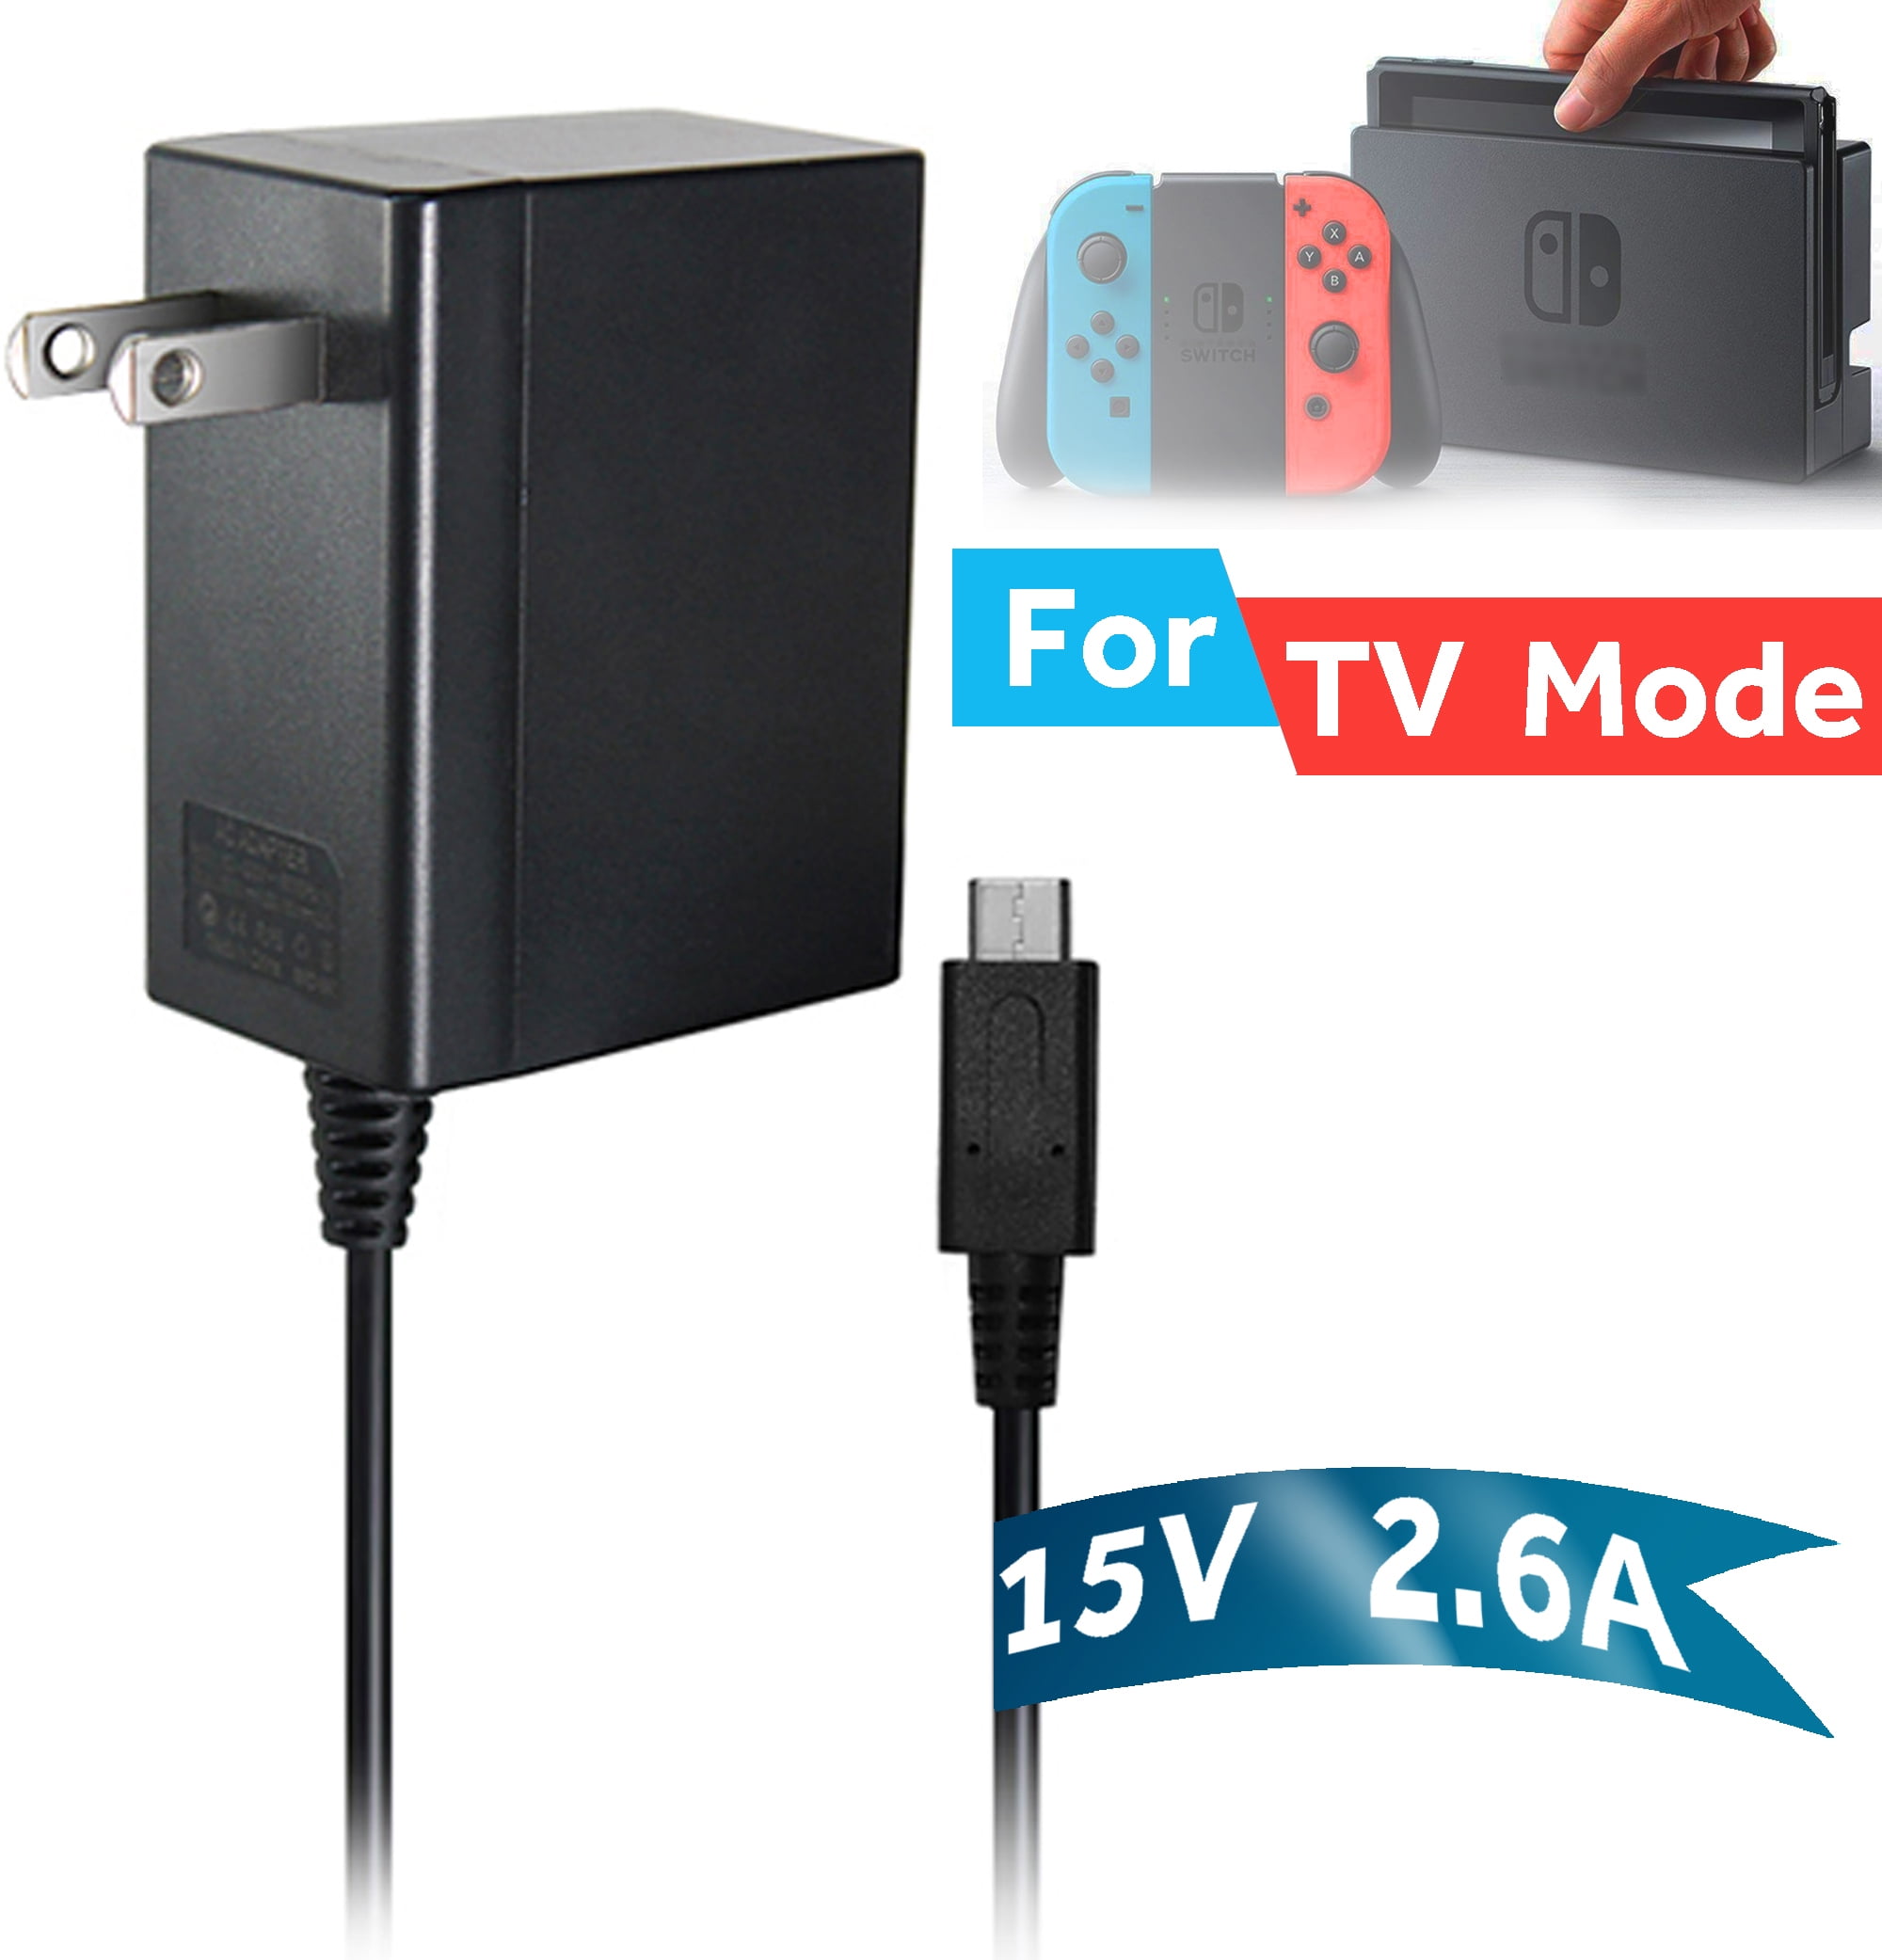 Agptek Nintendo Charger Ac Adapter Compatible With Classics Switch And Lite Switch Support Tv Mode And Dock Charging Power Adapter 4 9ft Cord 5v 1 5a 15v 2 6a Black Walmart Com